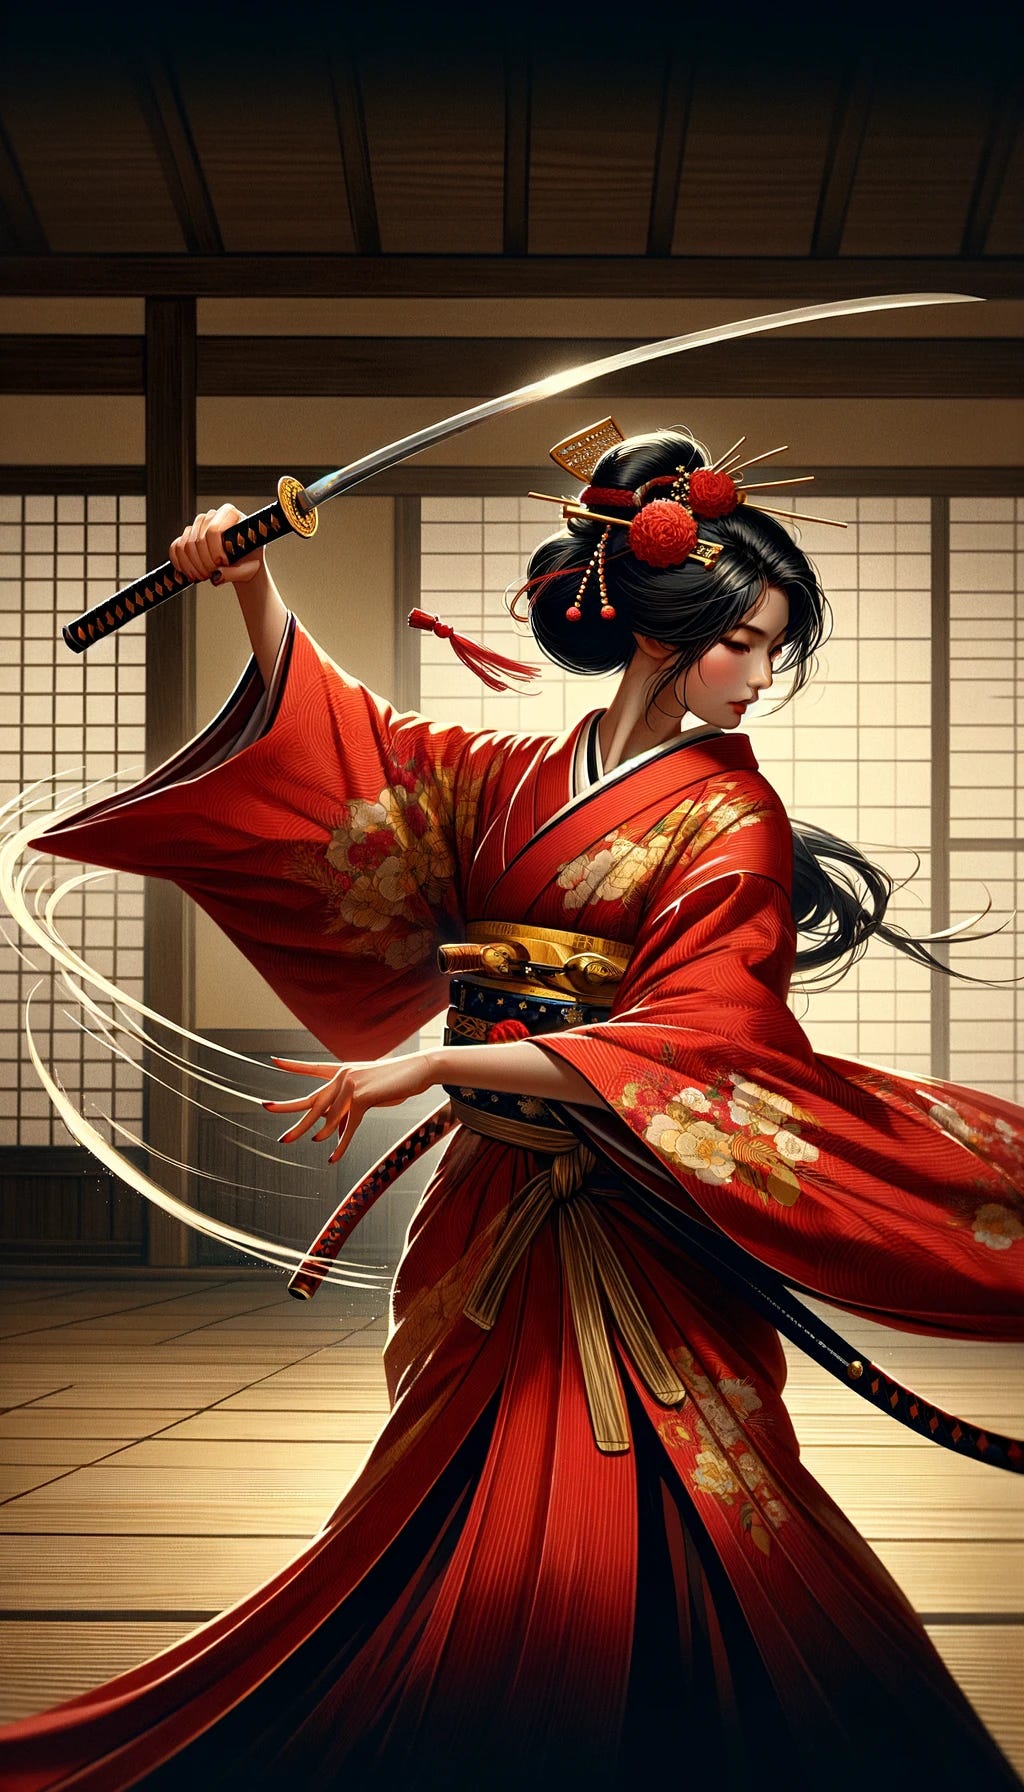 Illustration of a female samurai of East Asian descent, draped in a vibrant red and gold kimono-style battle garment, wielding a single, ornate katana sword. The blade is in a dynamic swirl around her, capturing a moment of fluid motion as if she were performing a martial dance. Her expression is focused and fierce, with a traditional hairstyle that includes delicate hairpins. The setting is an ancient dojo with paper walls and wooden floors, dimly lit by hanging lanterns.